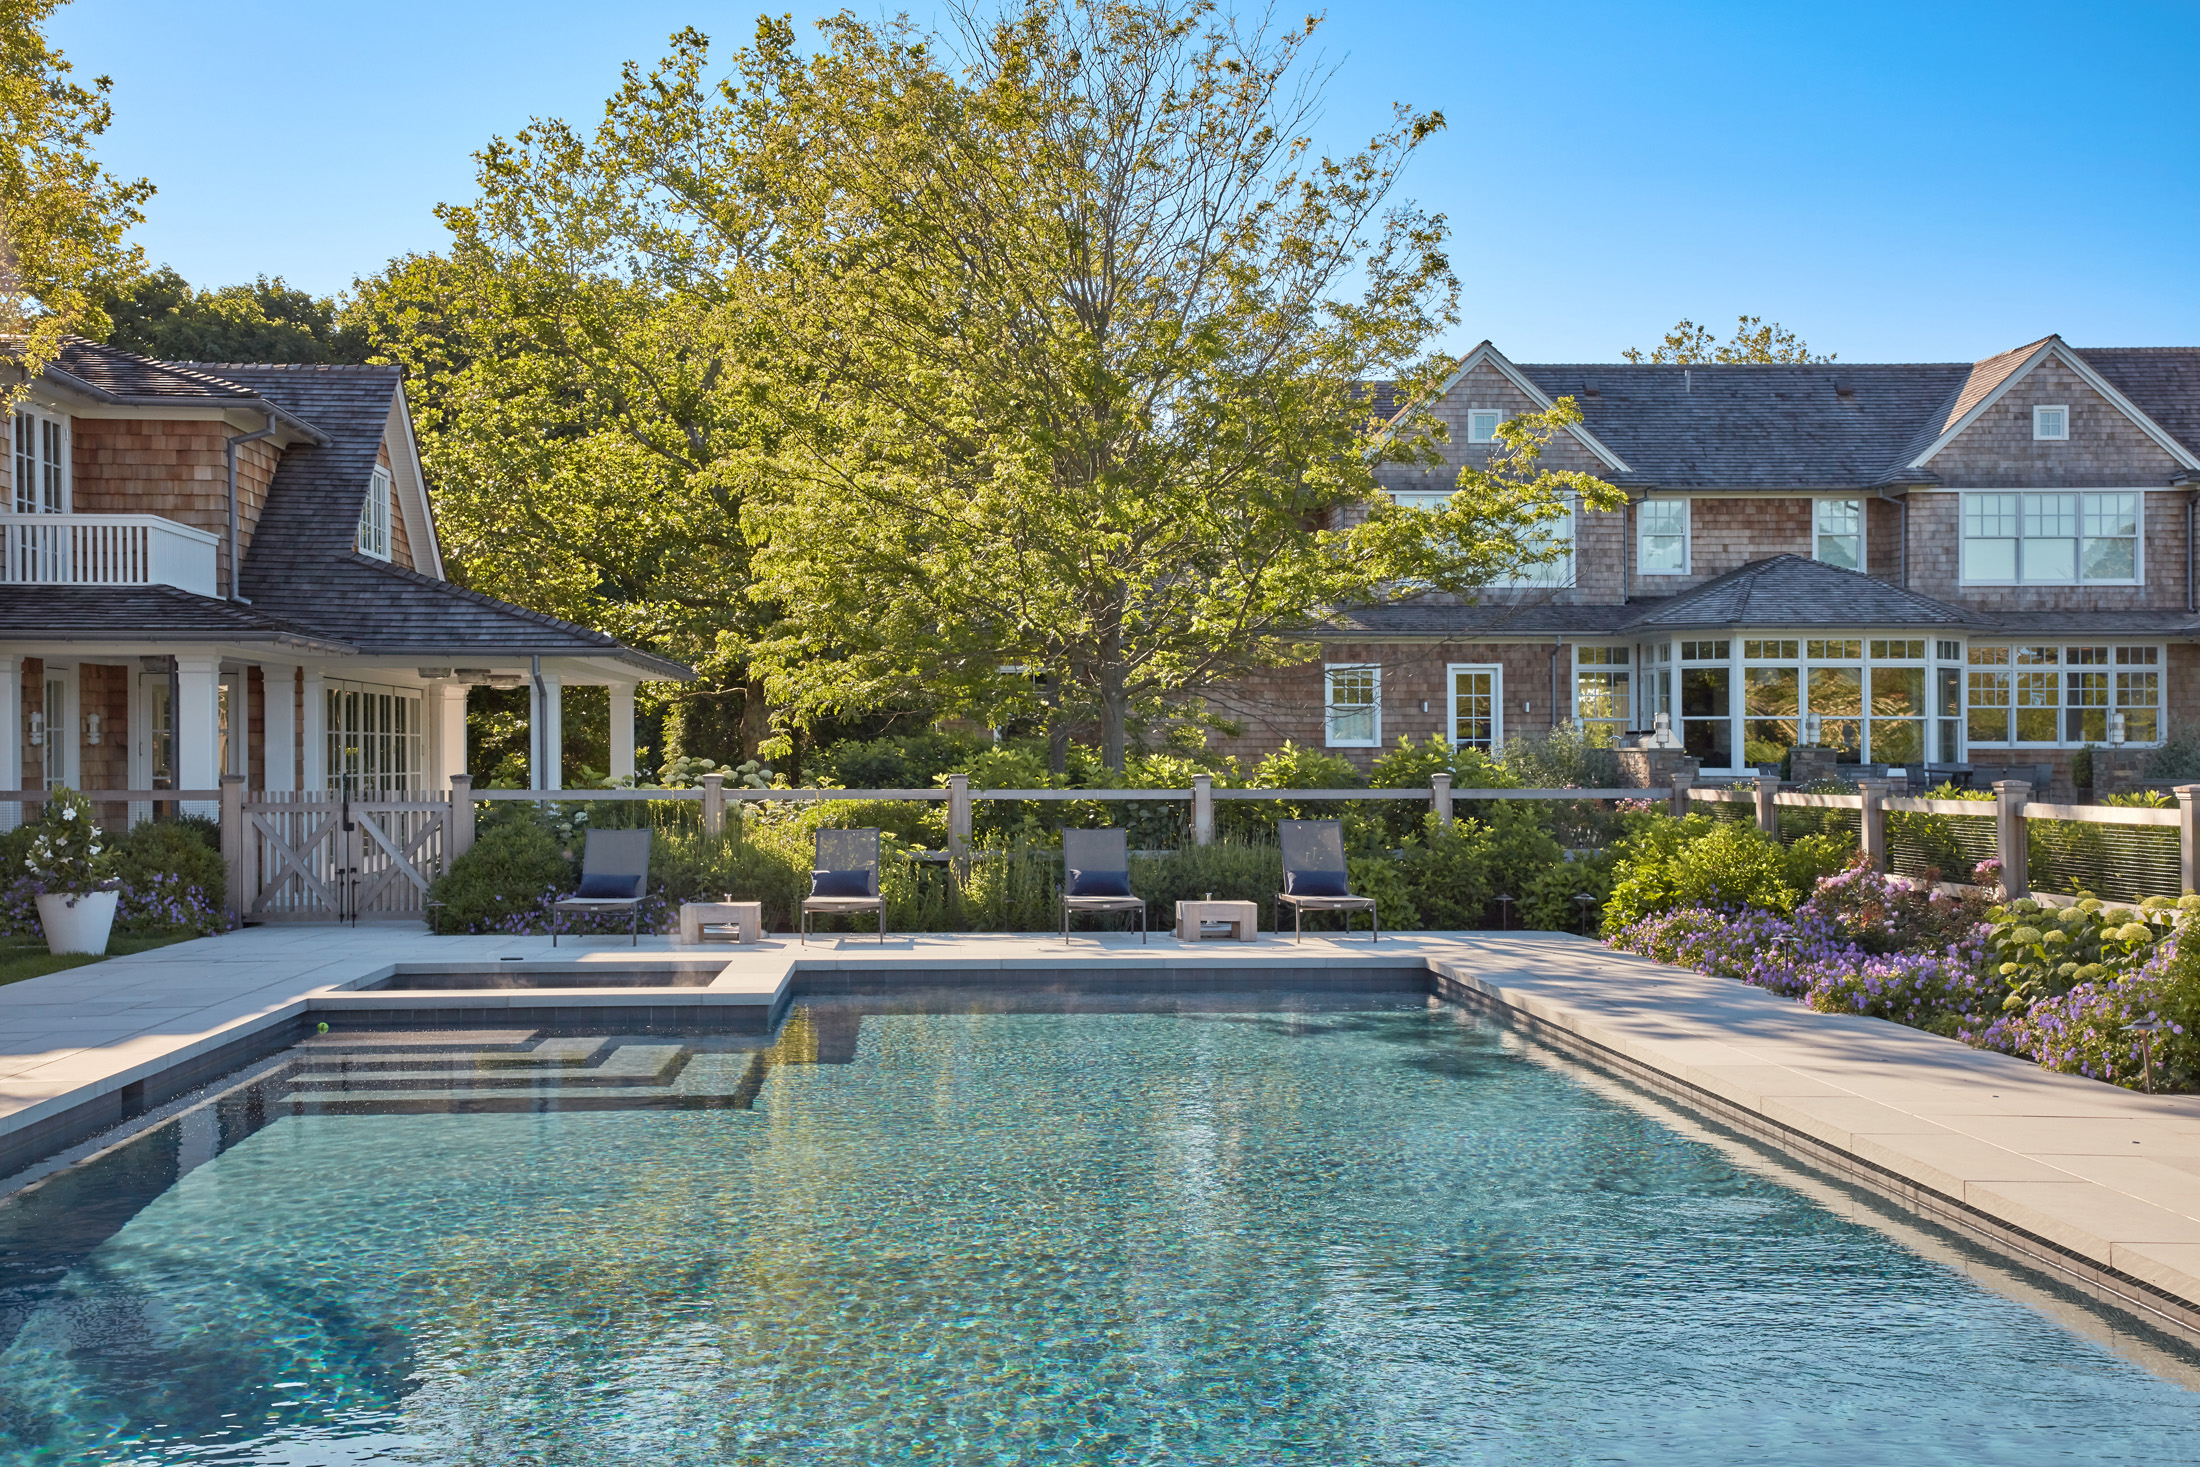 Backyard Pool designed by Ed Hollander with Hamptons-inspired design and landscaping